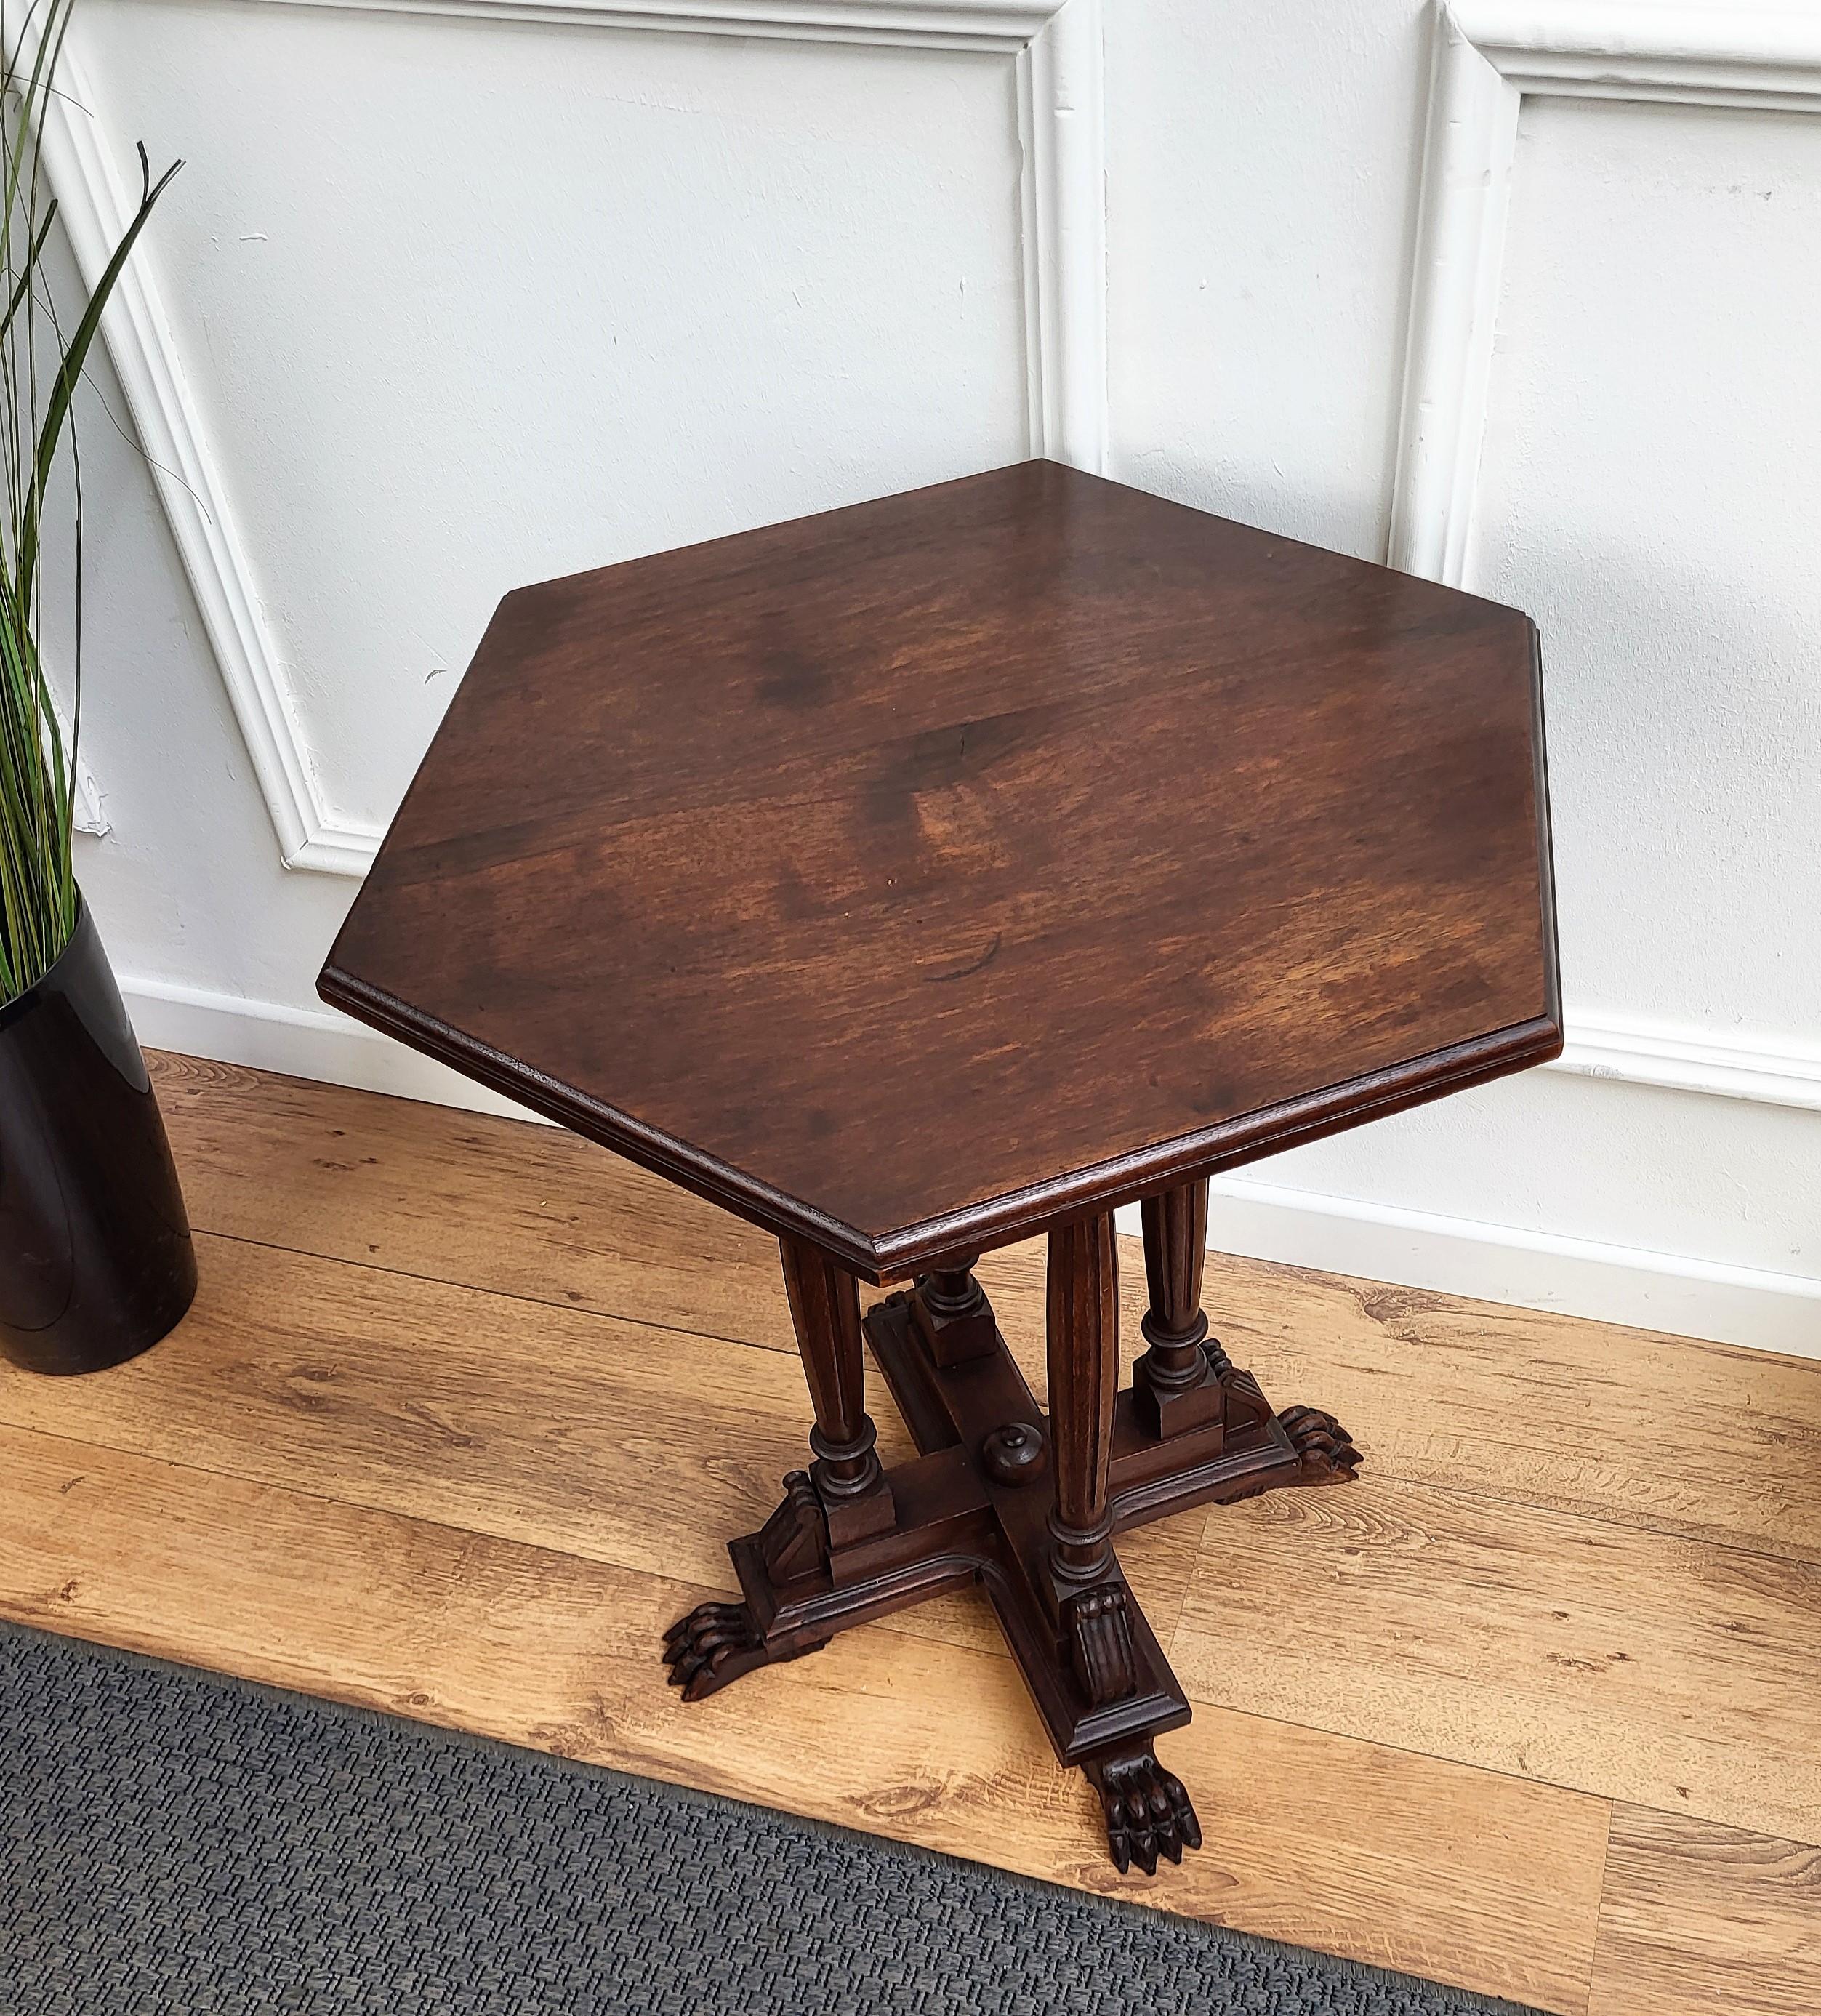 Antique Italian Hexagonal Walnut Side Table Stool with Carved Legs Animal Feet In Good Condition For Sale In Carimate, Como